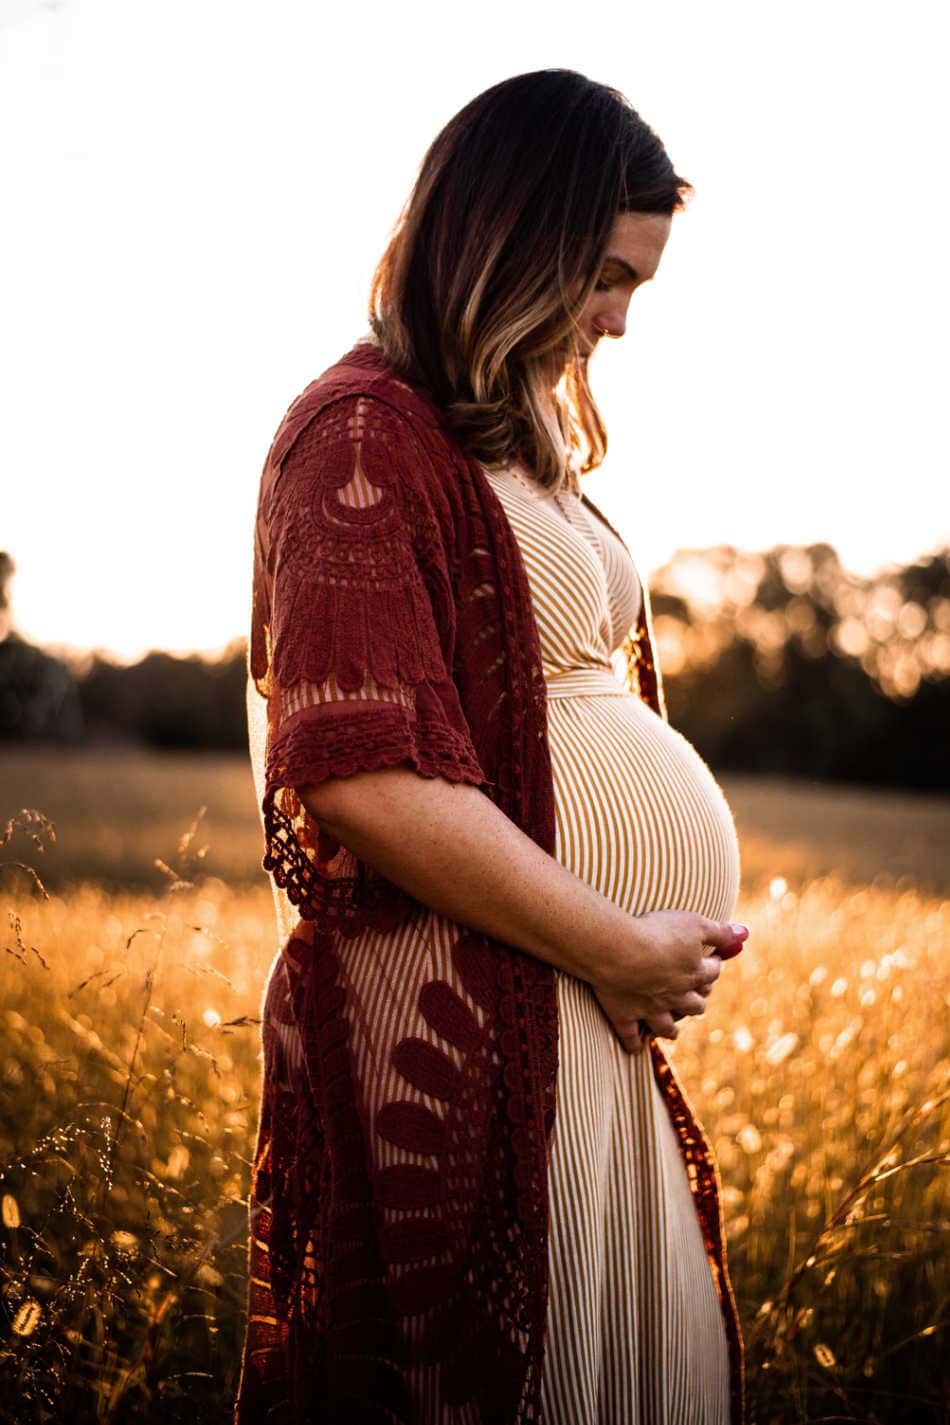 5 Simple Ways I'm Preparing For My Natural Delivery | Growing Up Herbal | Baby Ezrah is almost here, and I'm preparing for another natural delivery. Here are 5 simple things I'm doing to help me get ready.